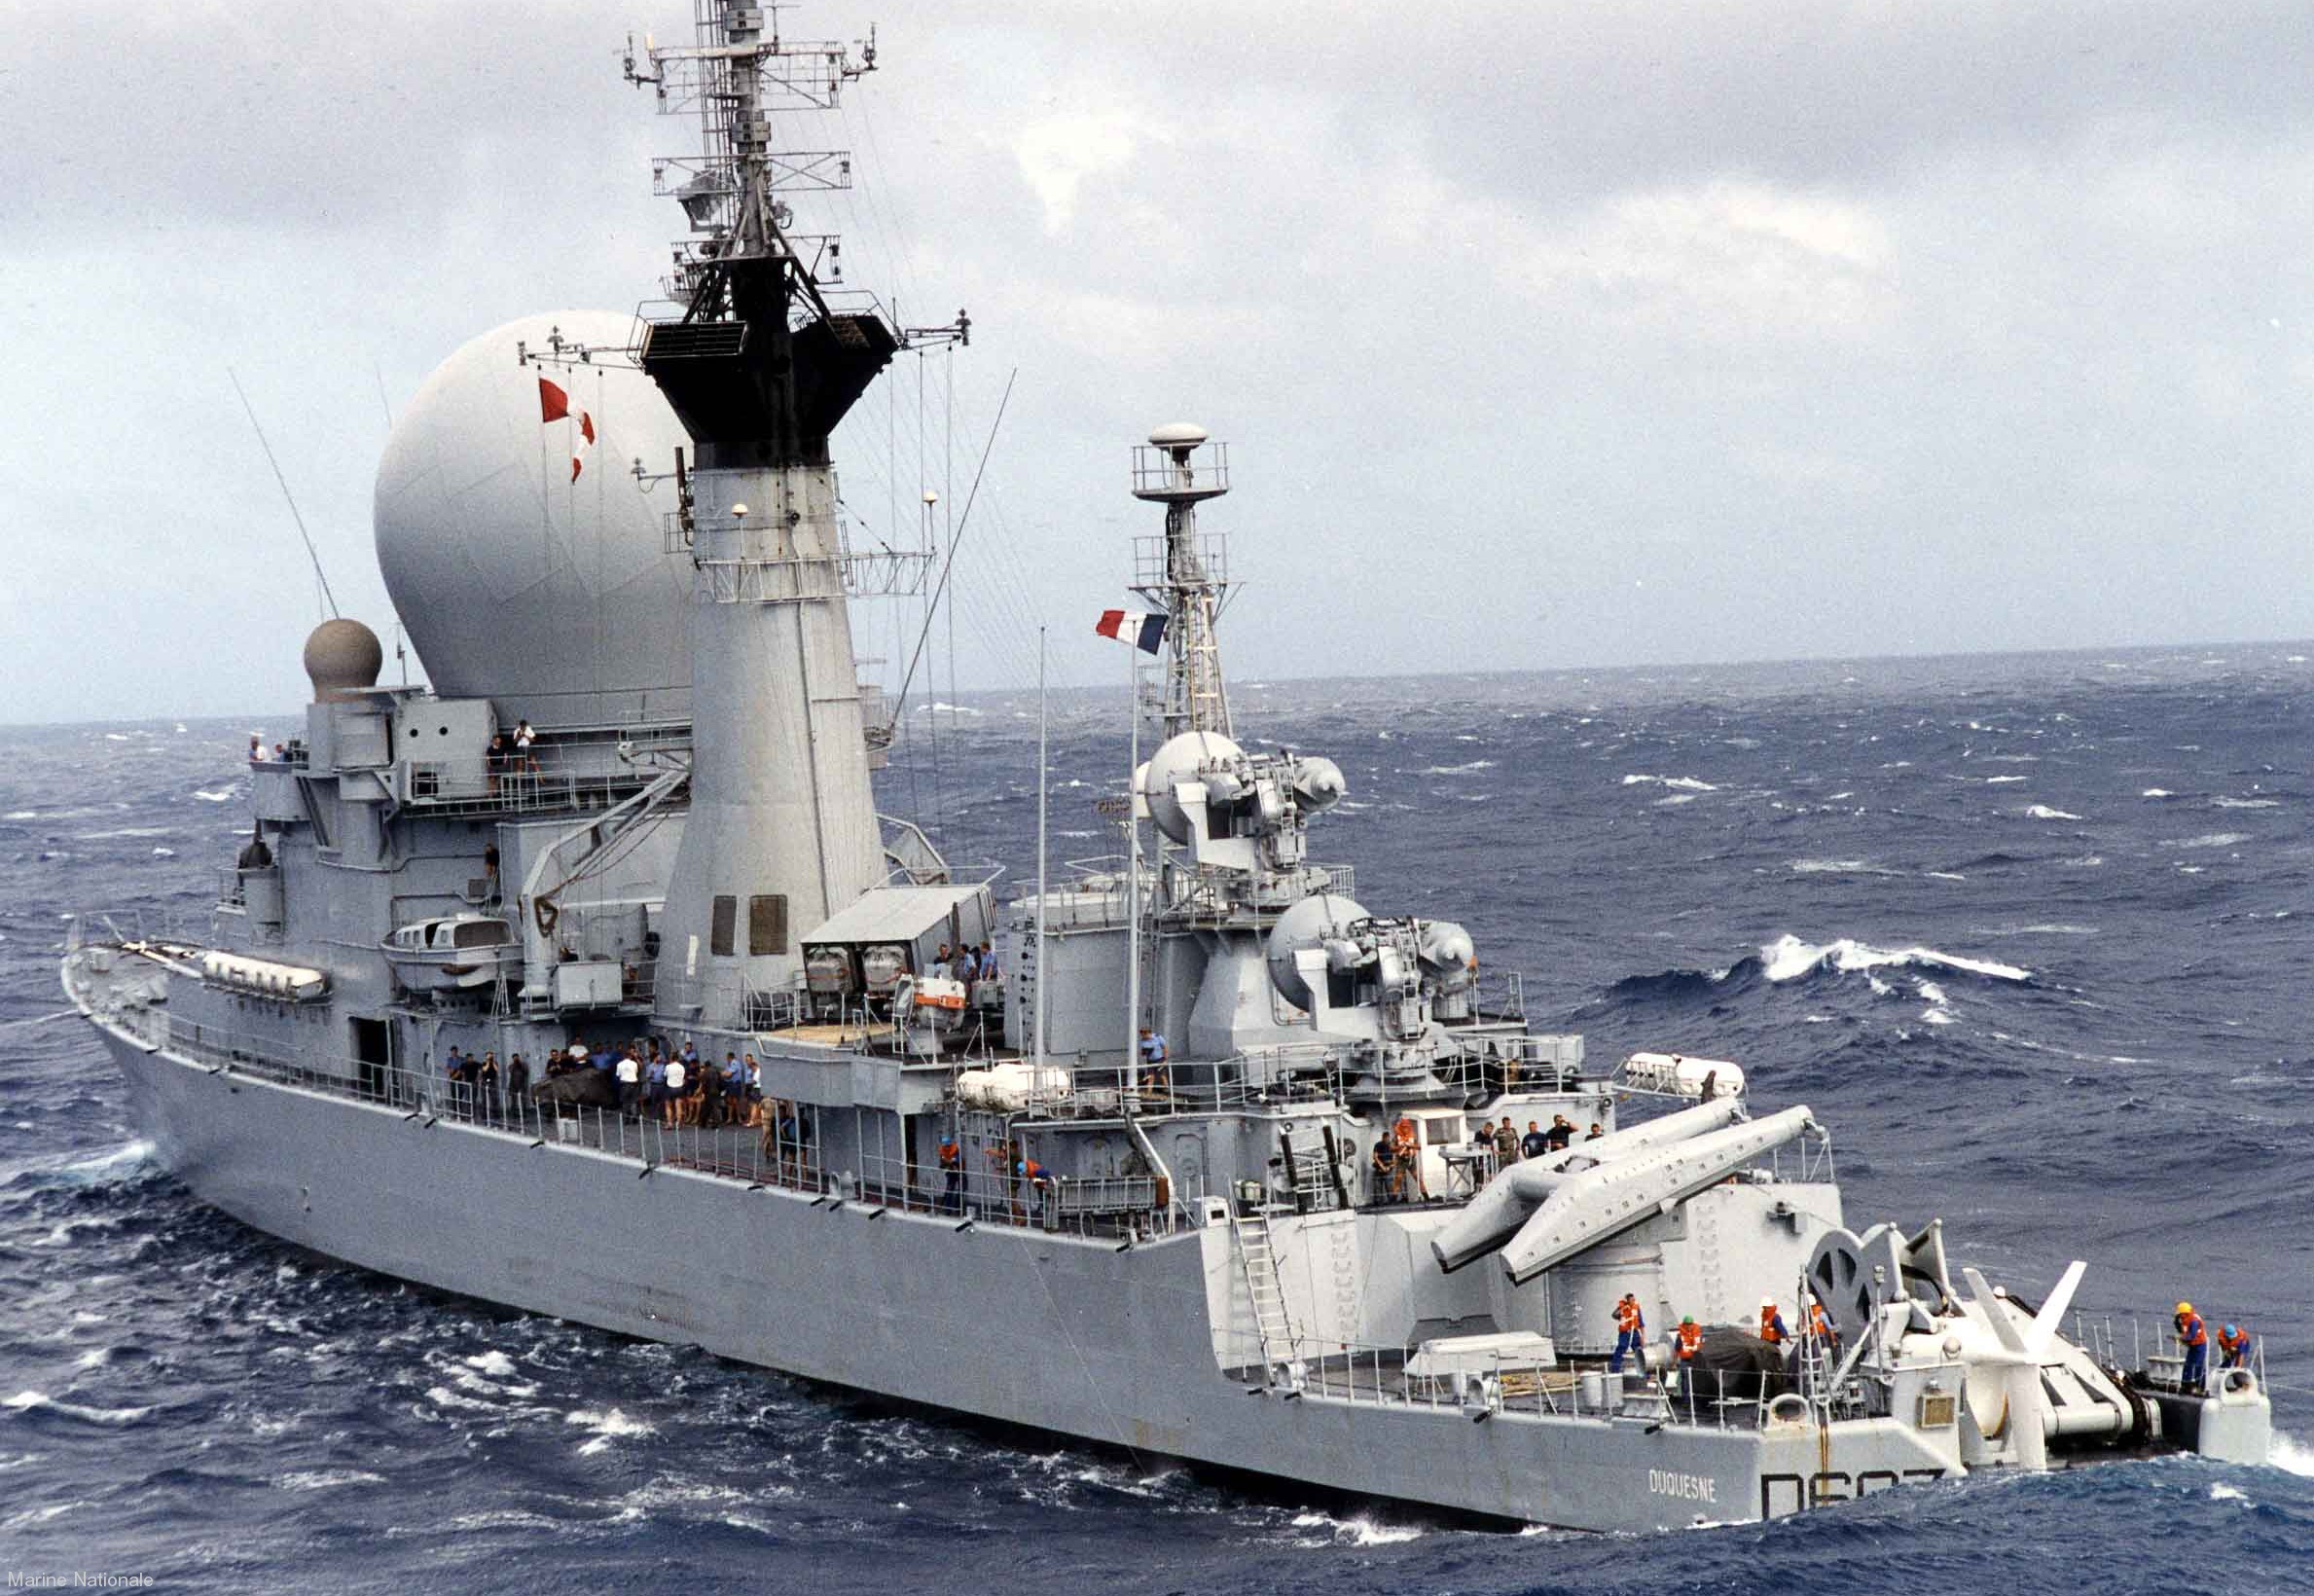 d-603 fs duquesne guided missile air defense frigate destroyer french navy marine nationale 03